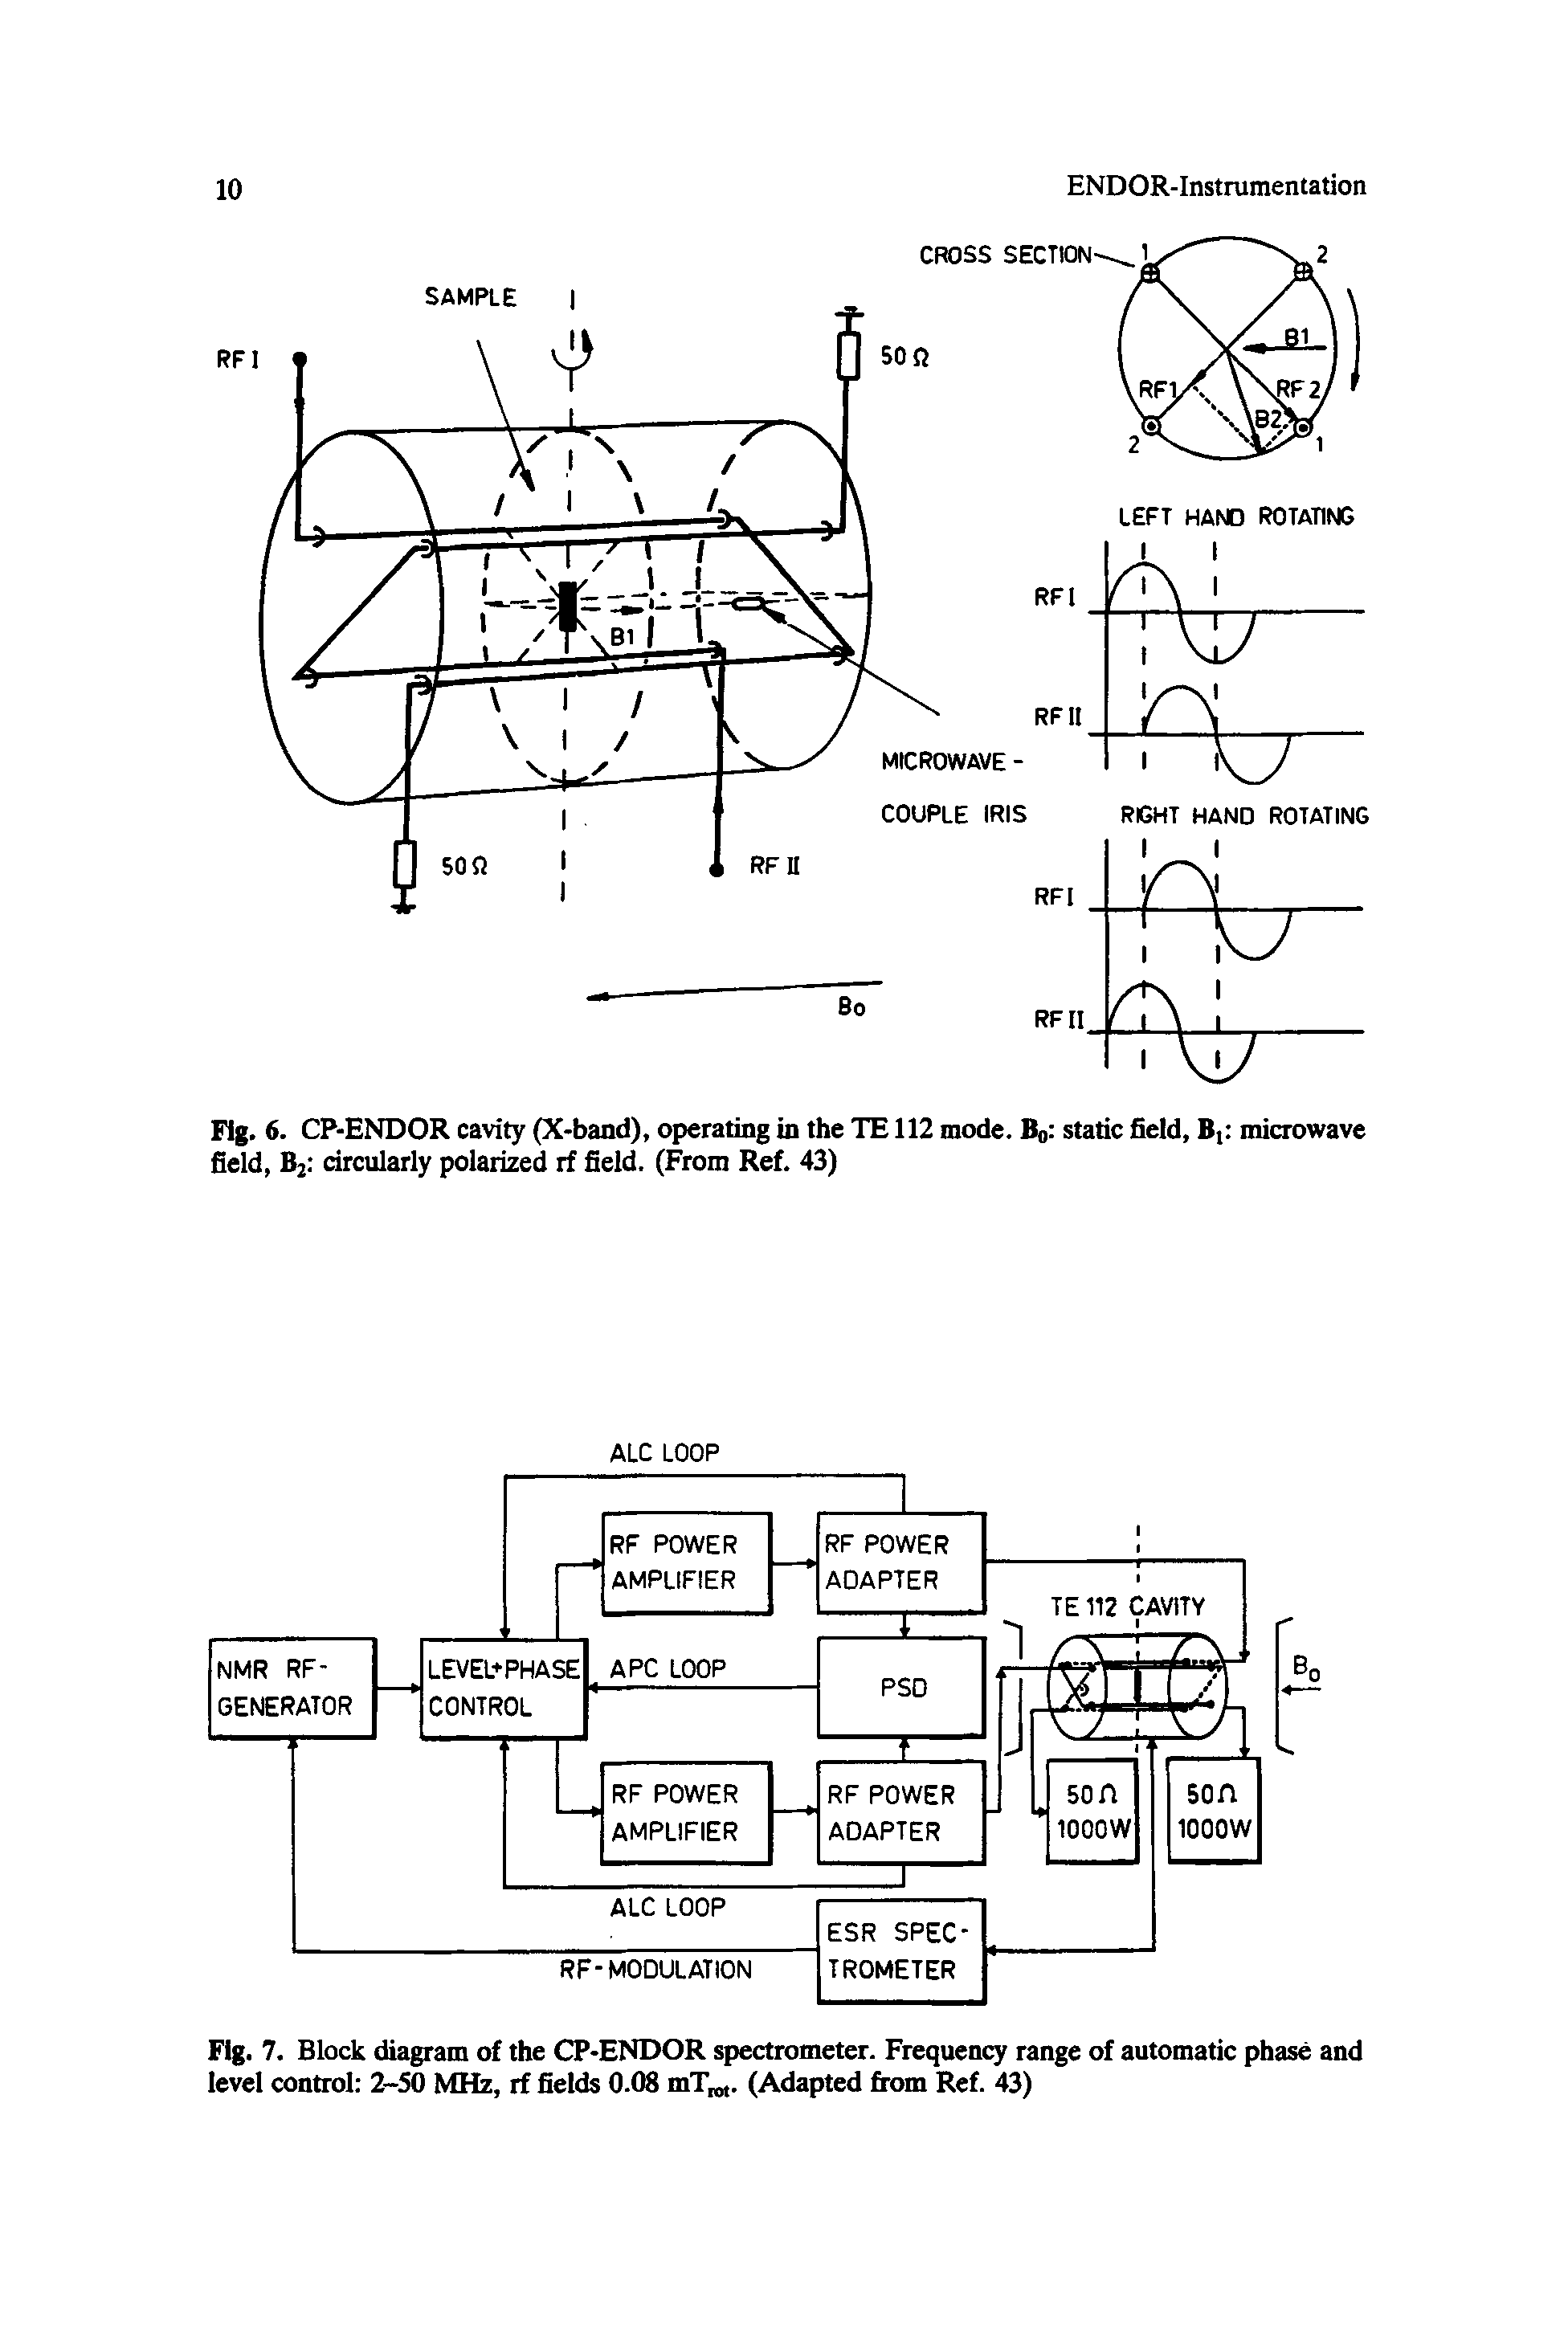 Fig. 7. Block diagram of the CP-ENDOR spectrometer. Frequency range of automatic phase and level control 2-50 MHz, rf fields 0.08 mT, . (Adapted from Ref. 43)...